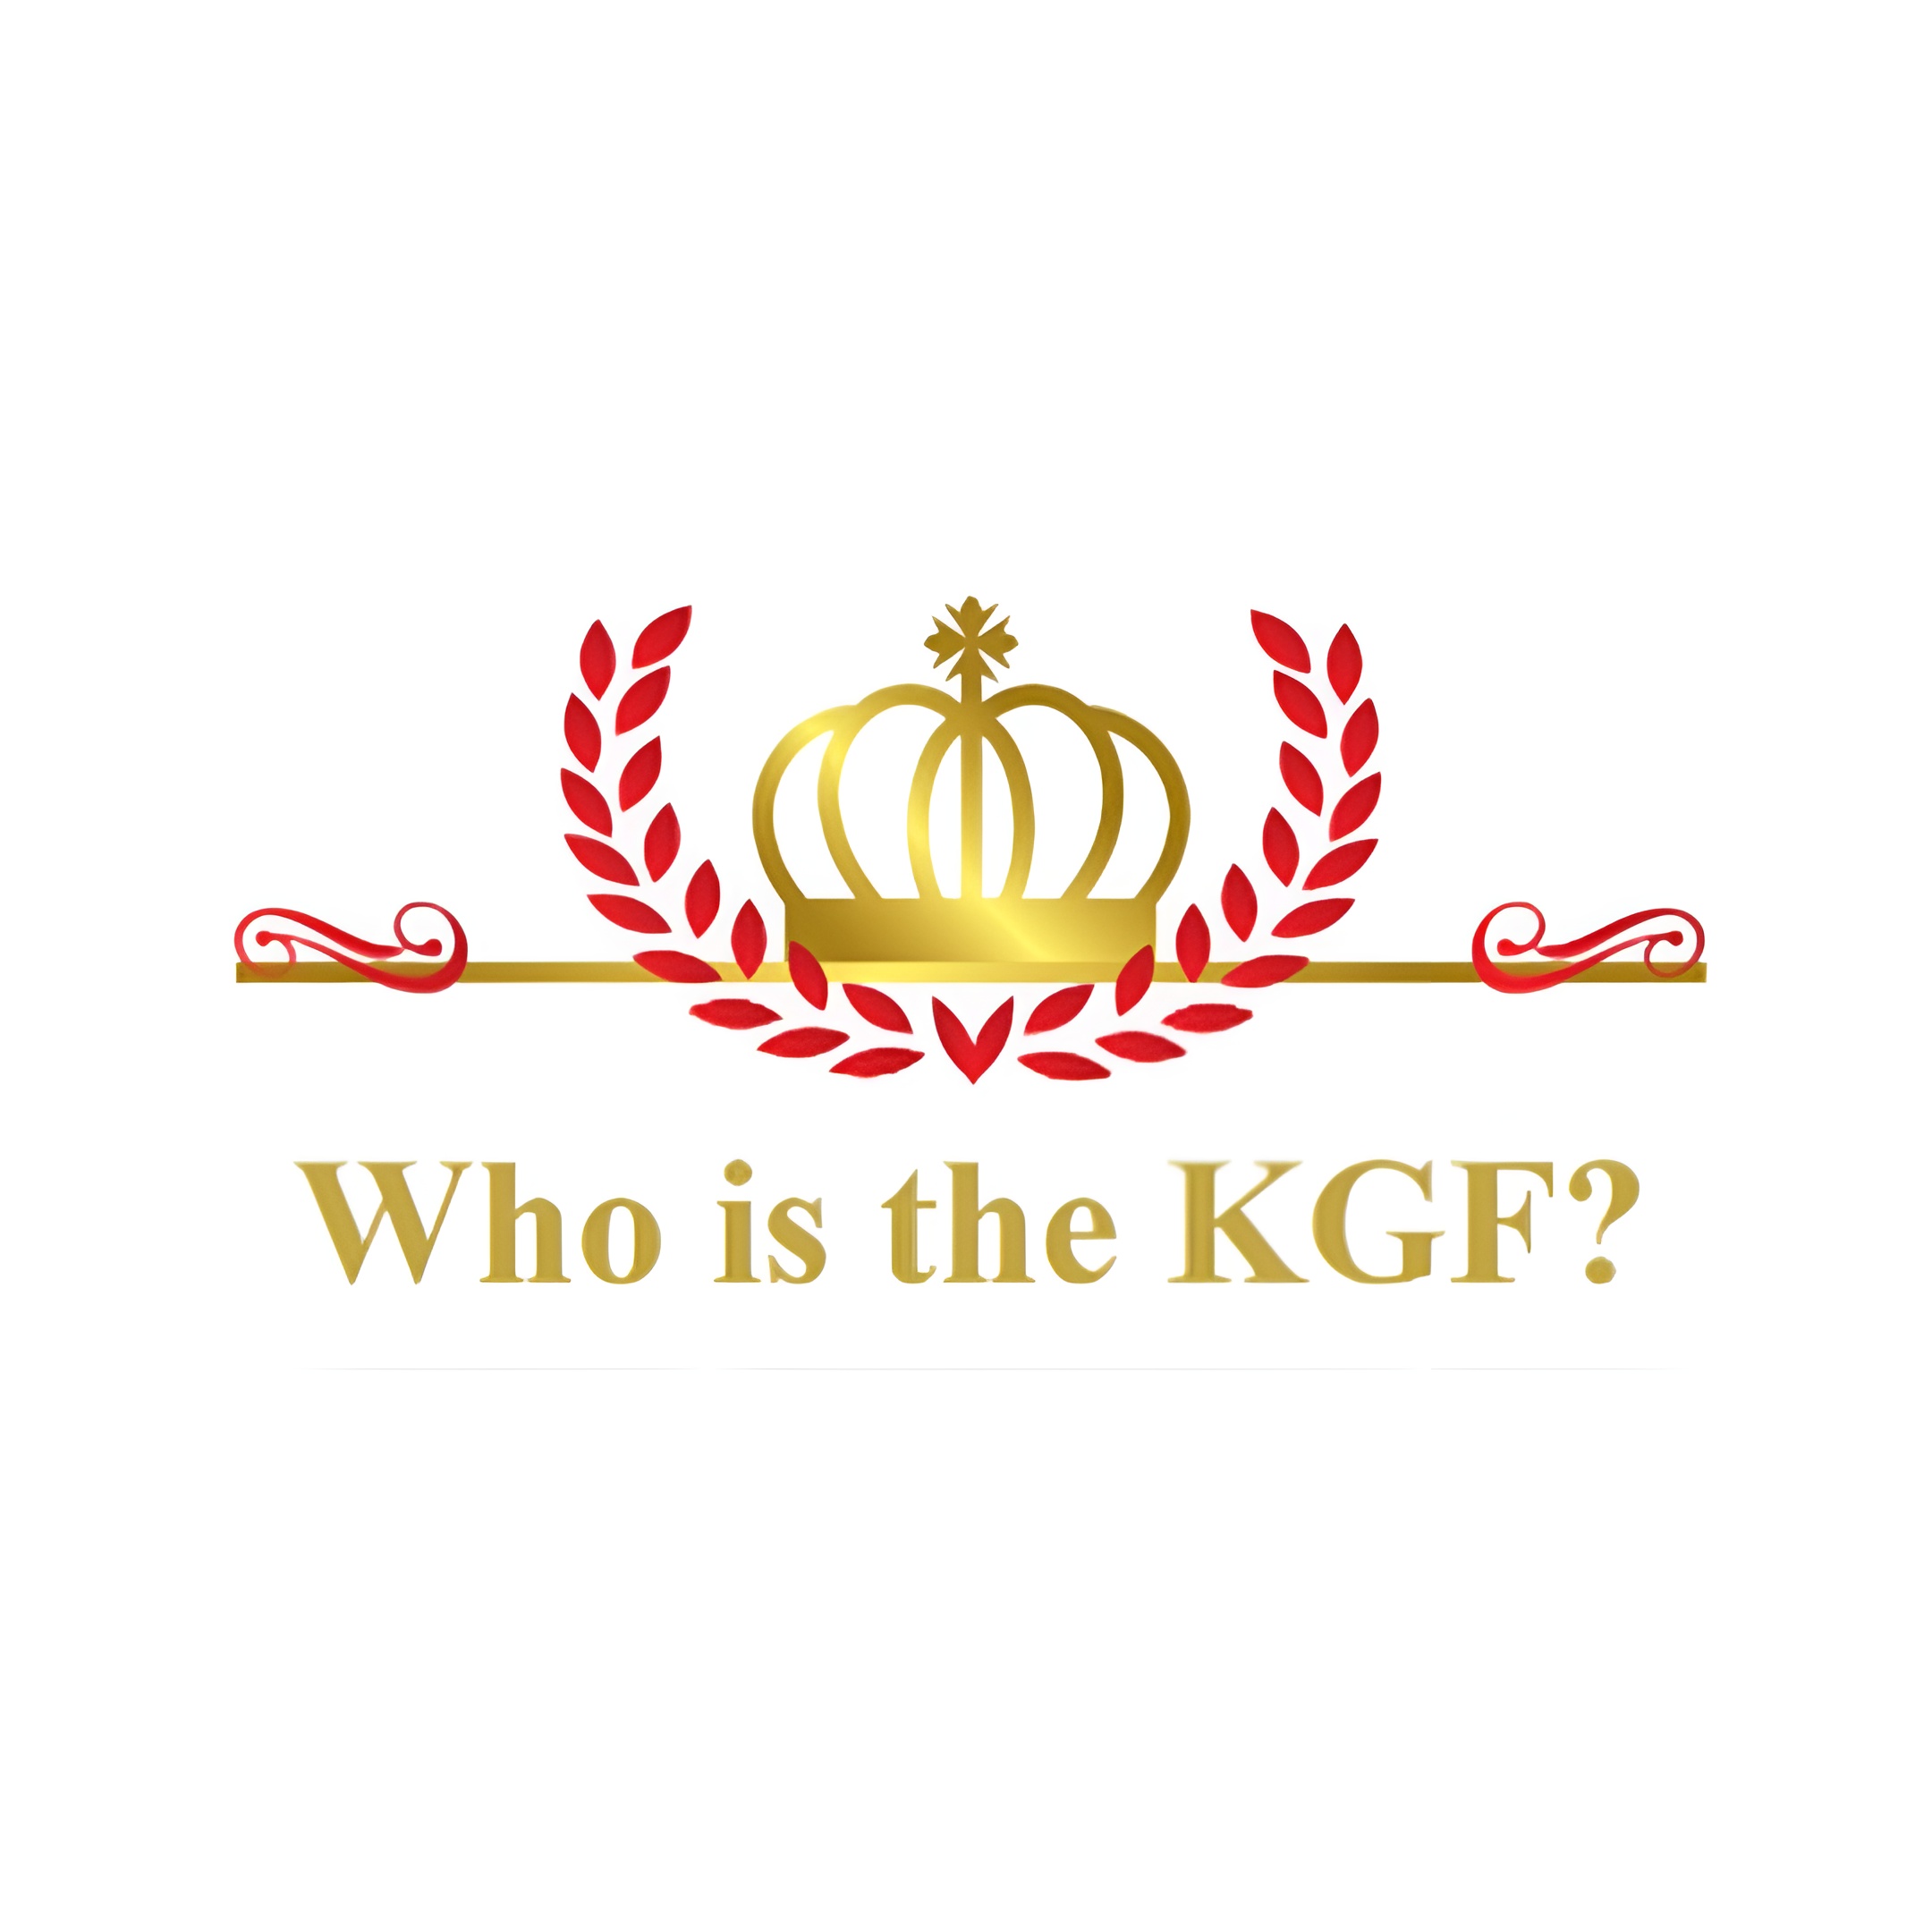 WHO IS THE KGF?